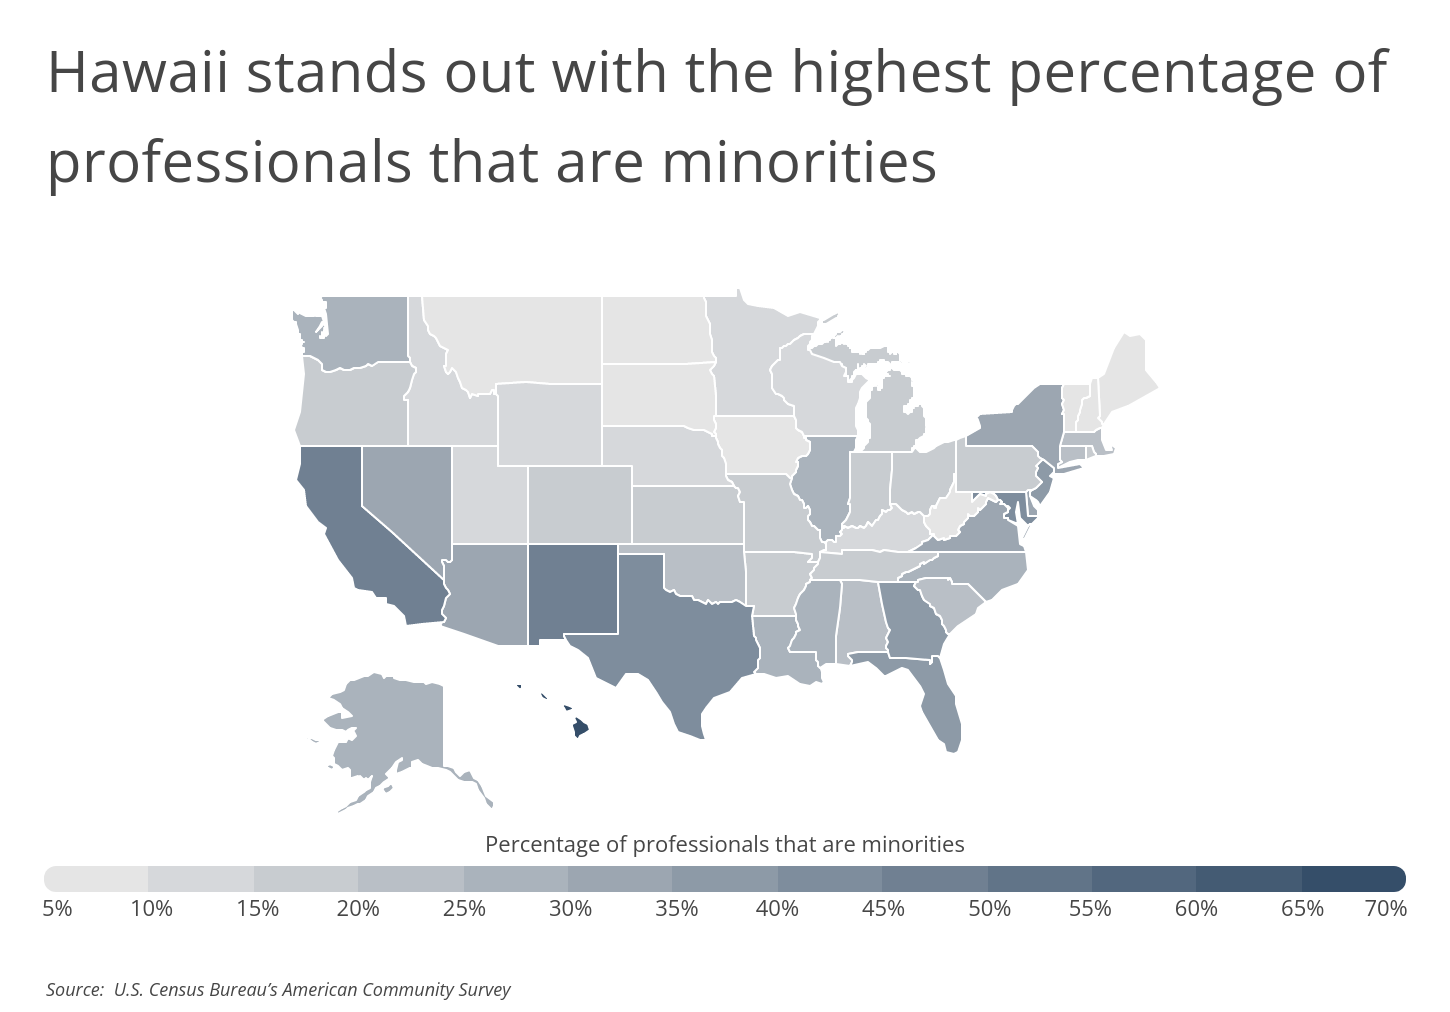 Chart3_HI stands out with the highest percentage of minority professionals